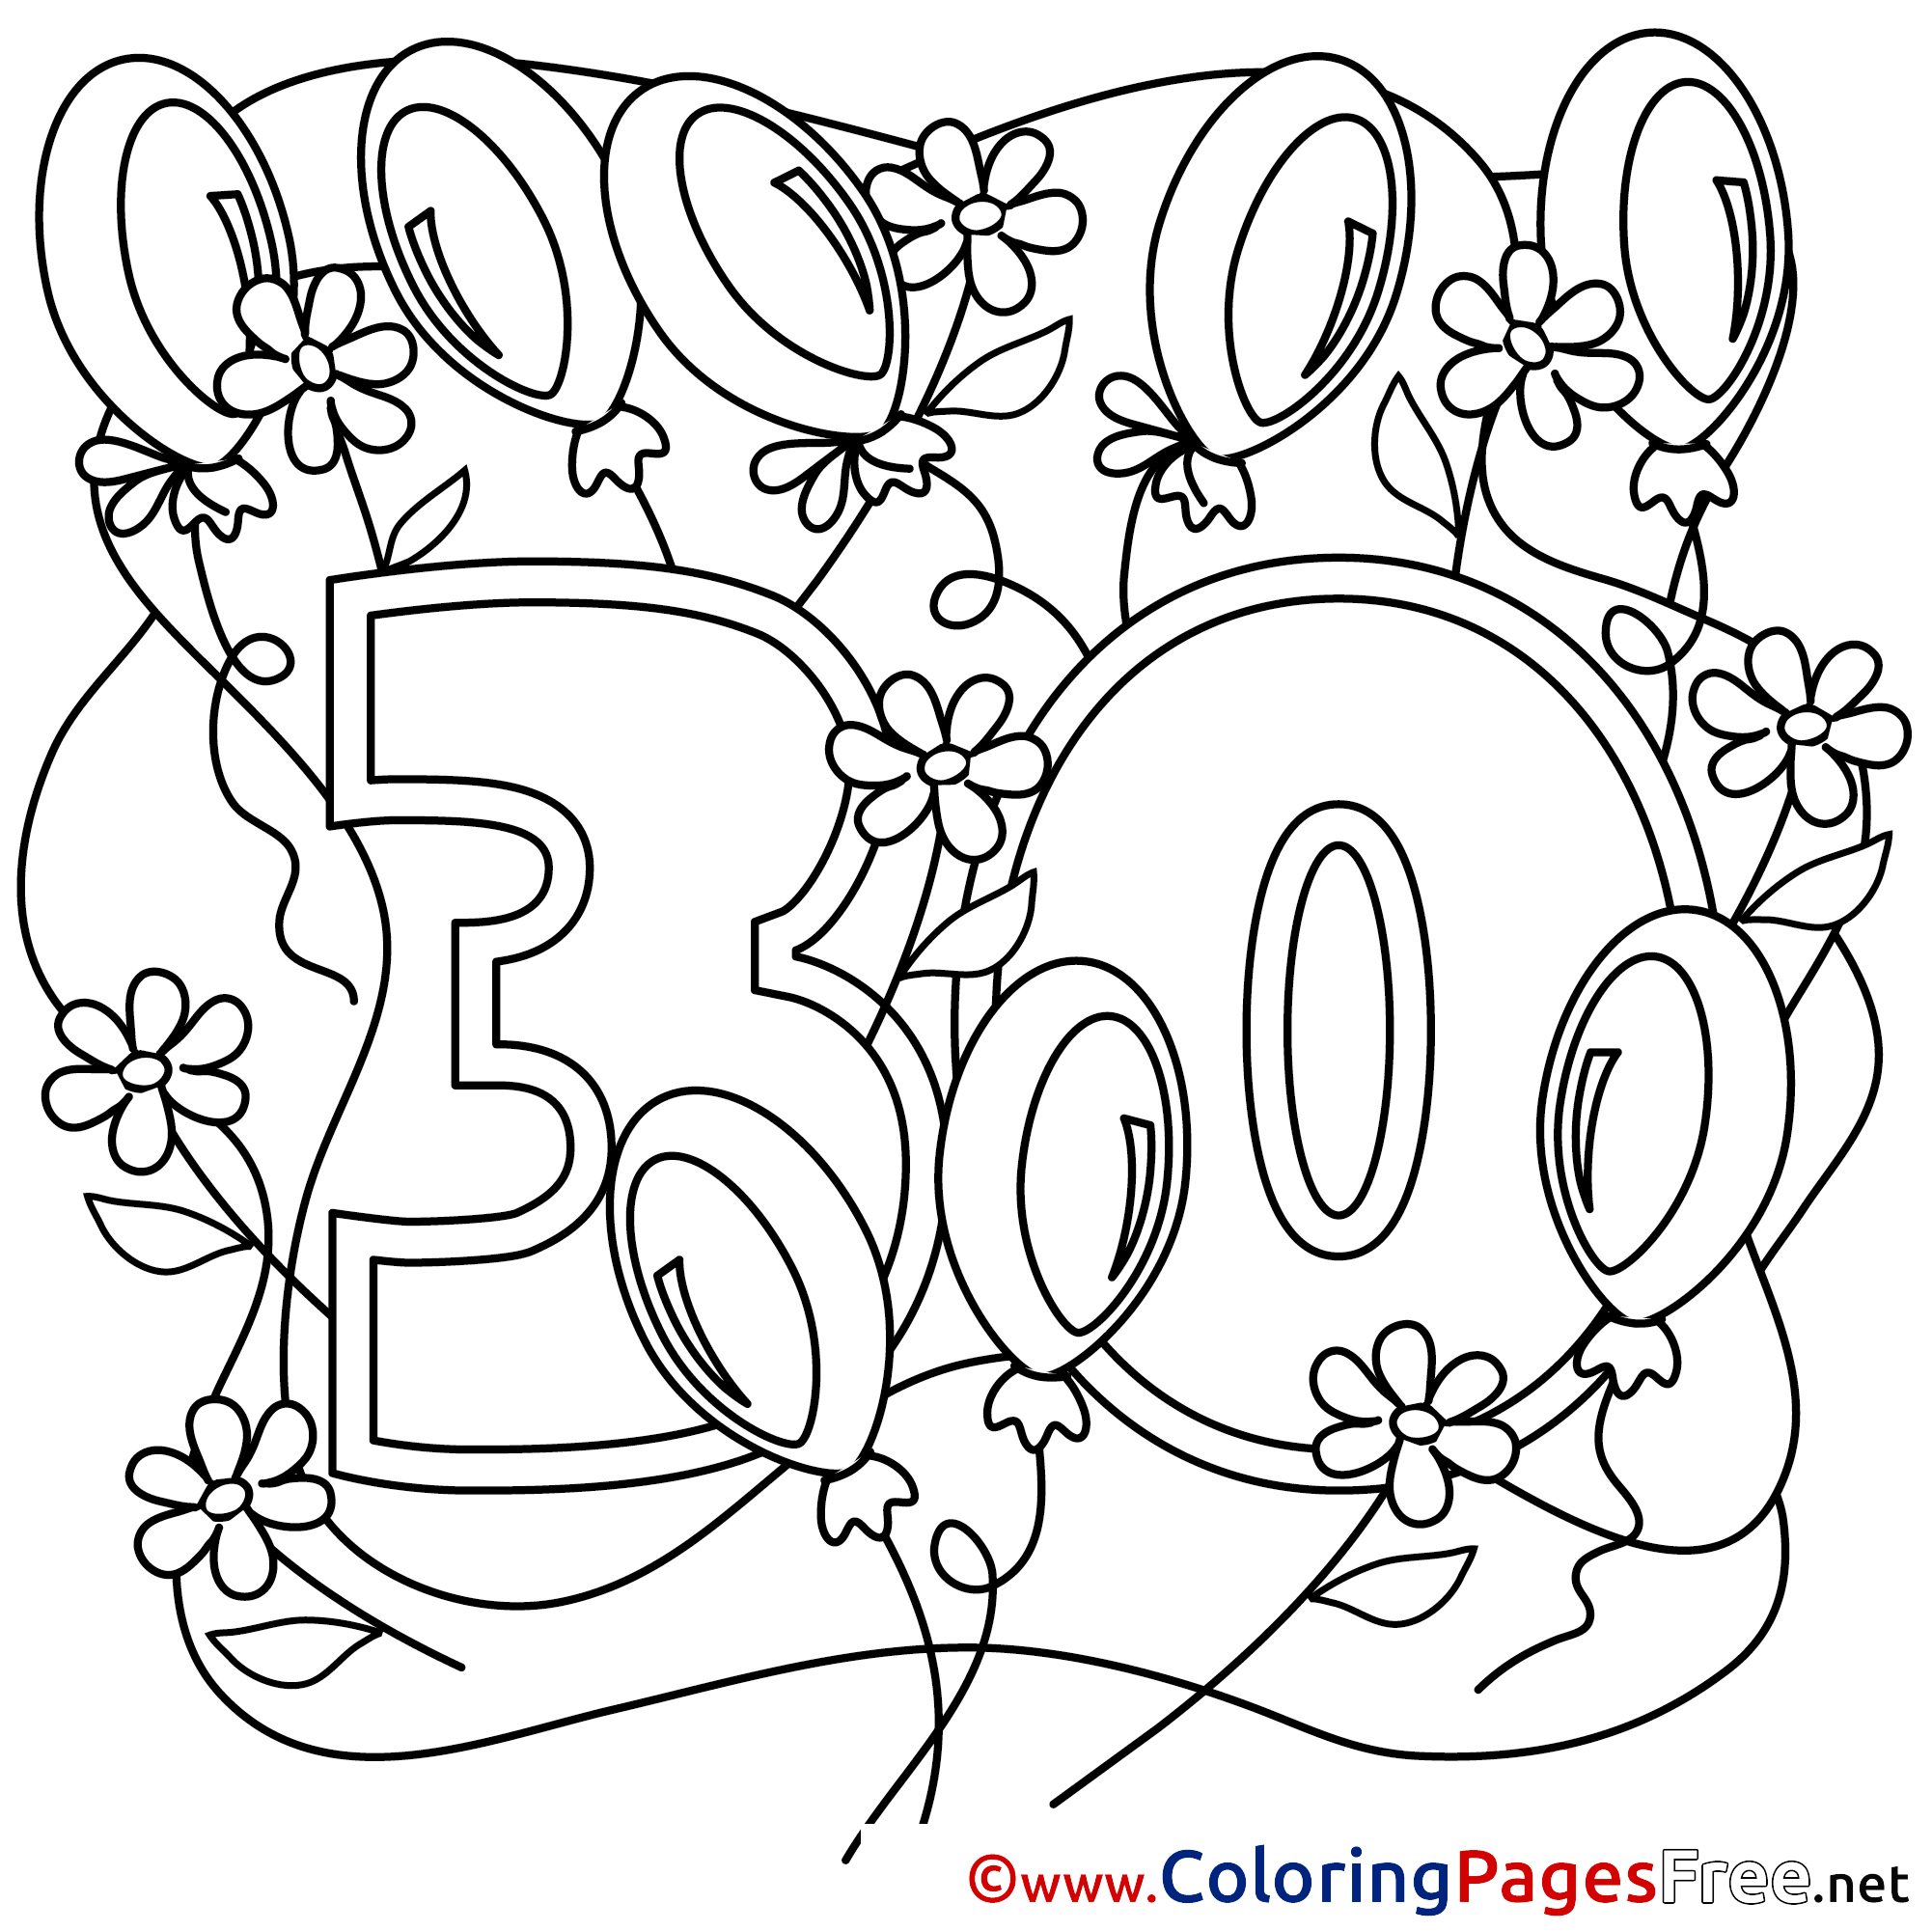 30 Years for Kids Happy Birthday Colouring Page